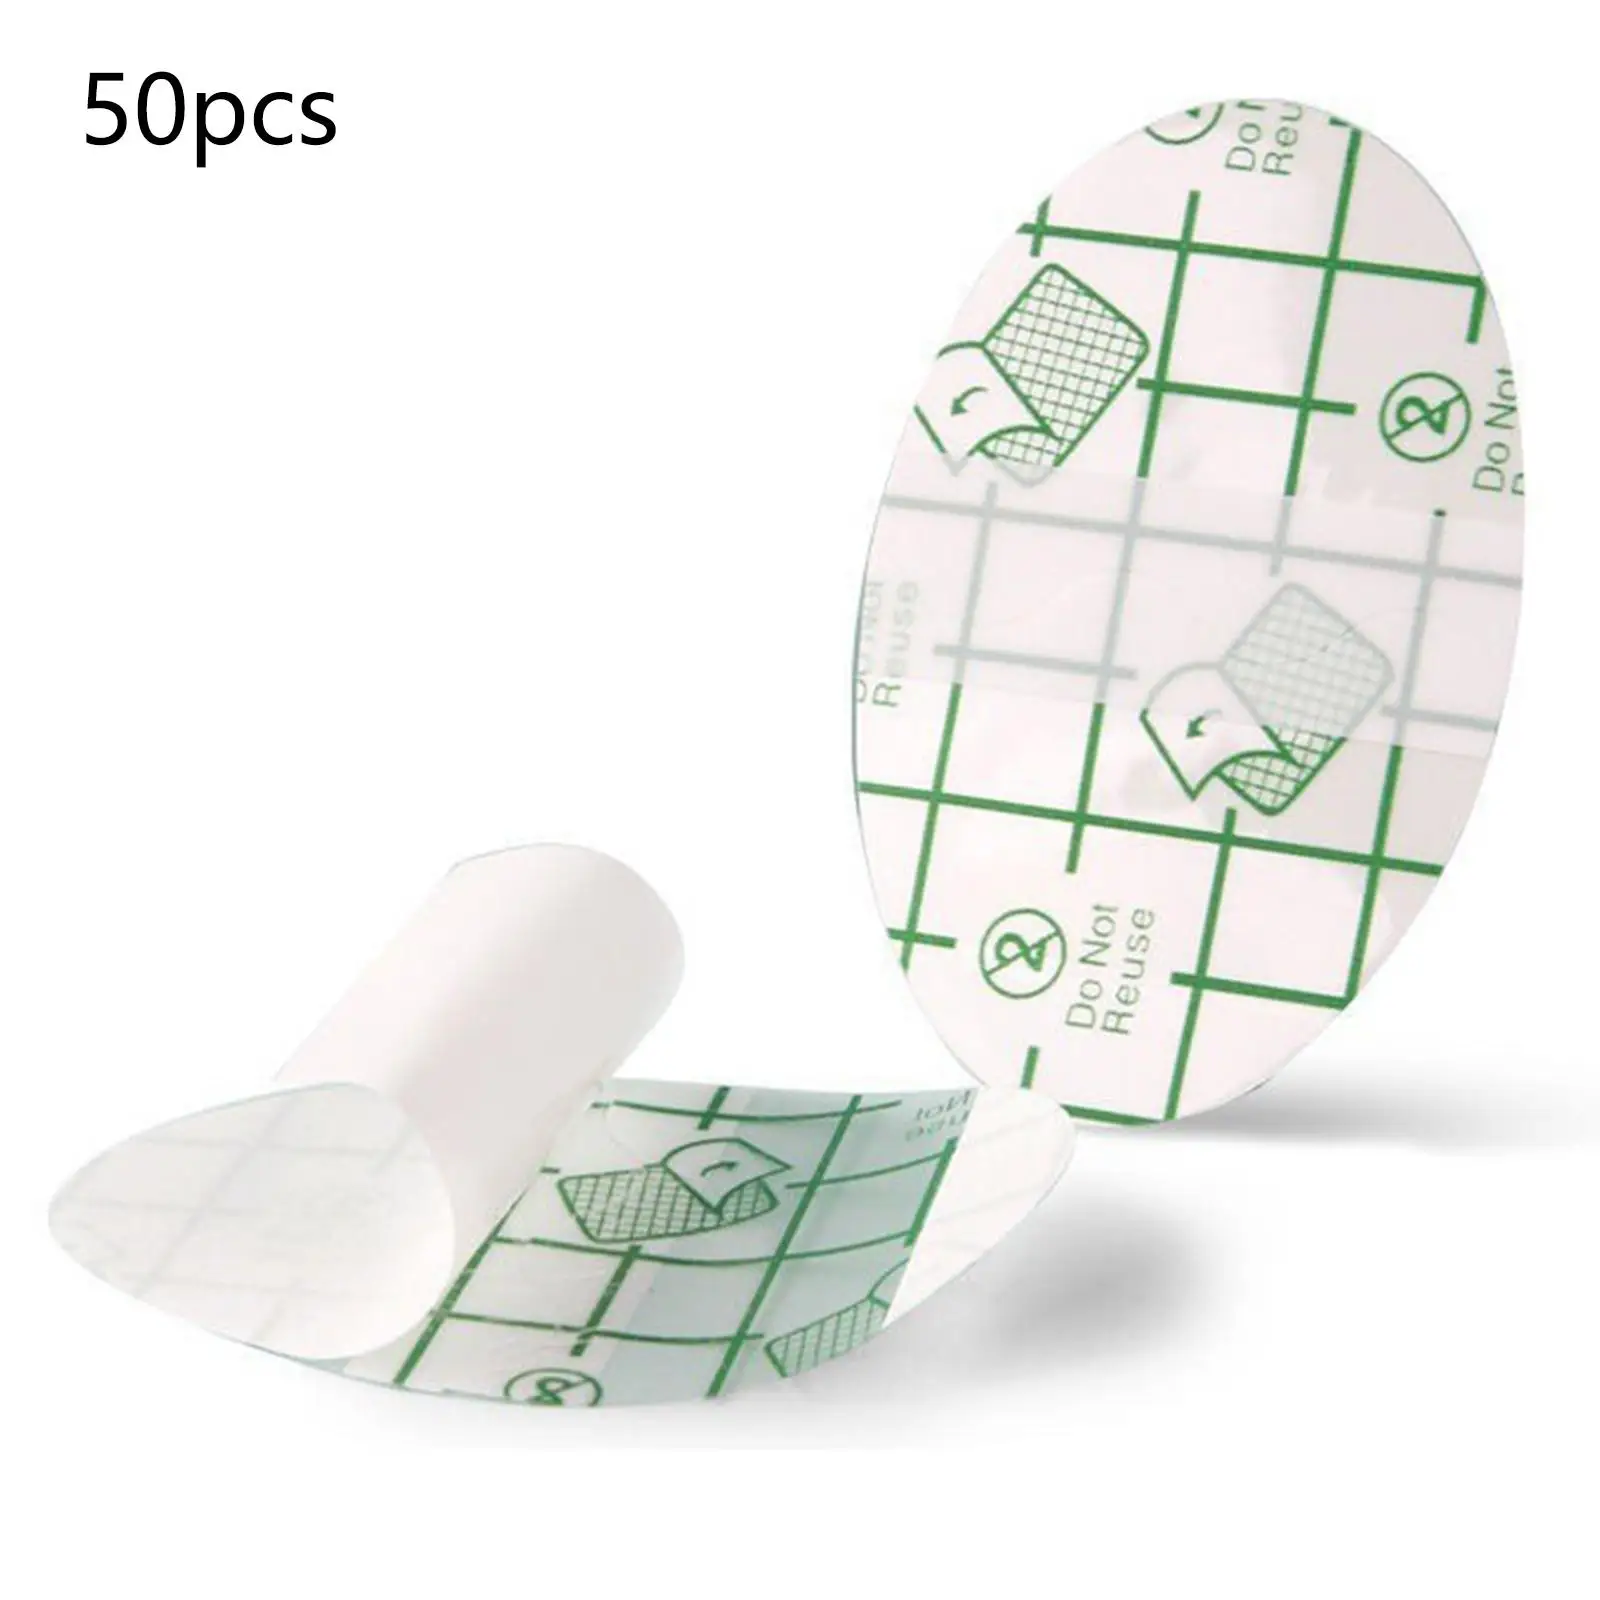 50x Baby Waterproof Ear Covers Disposable Comfortable Ear Tape Soft Portable for Shower Swimming Bathing Children Kids